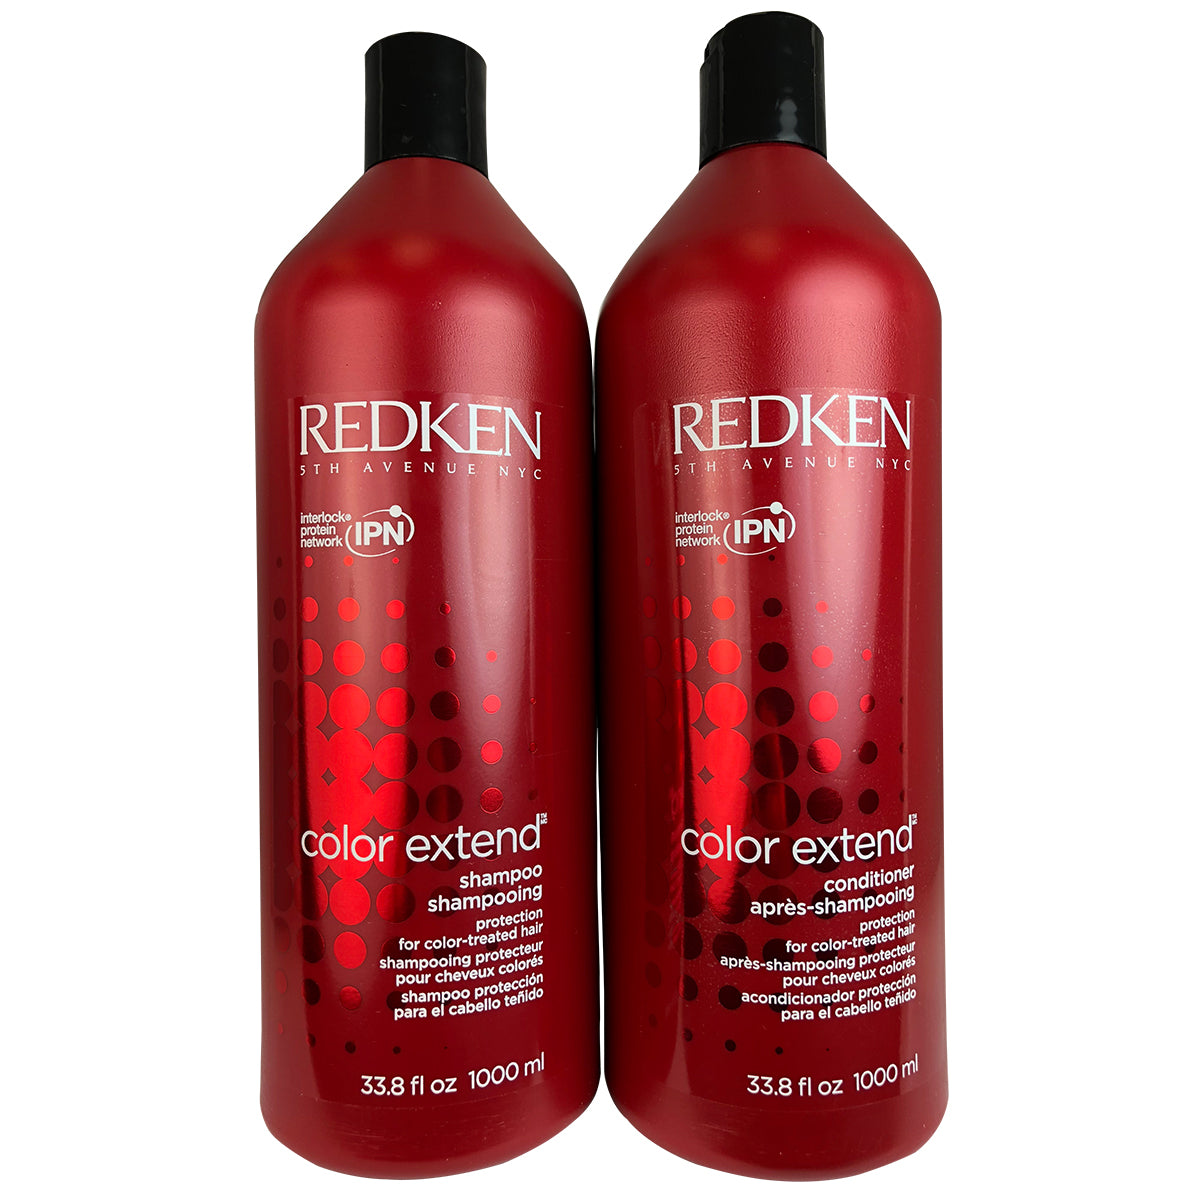 Redken Color Extend Hair Shampoo & Conditioner Duo 1 LITER Each for Colored Hair